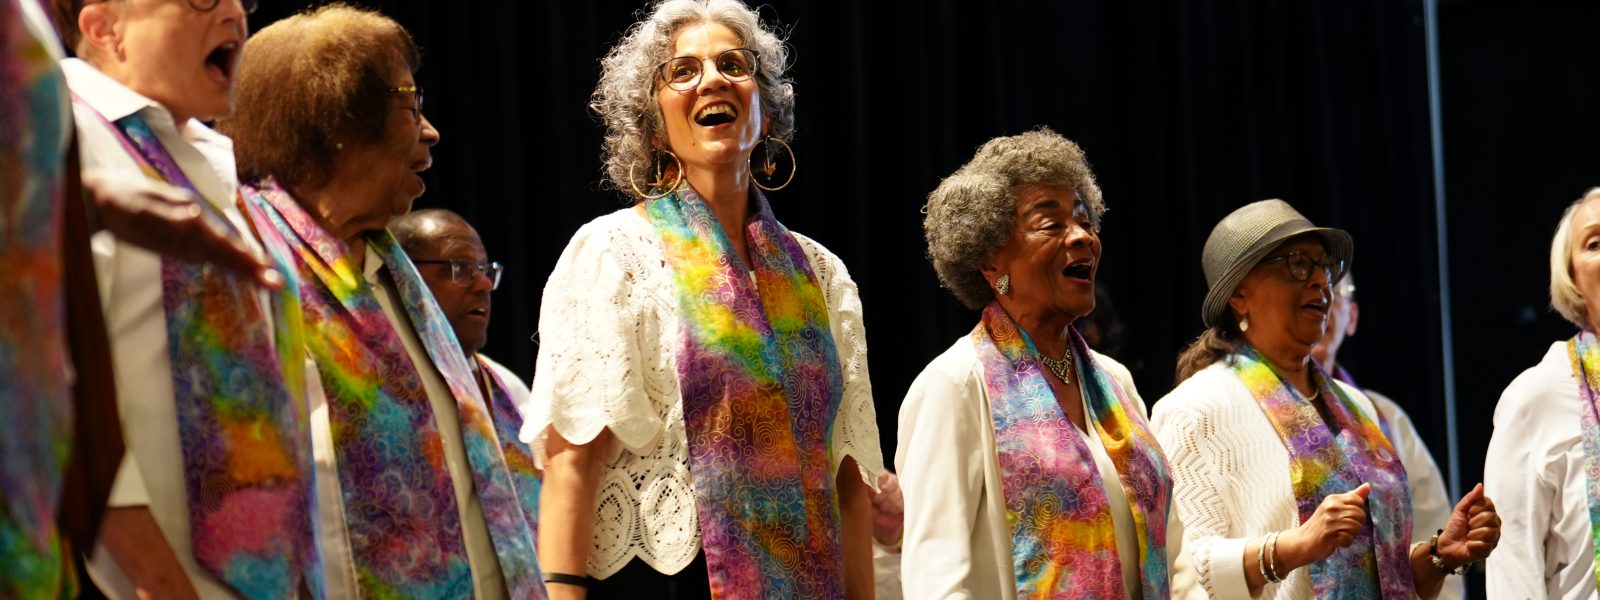 Adult Vintage Voices members wearing white shirts with colorful stoles and singing. Photo Credit: Novelli Jurado